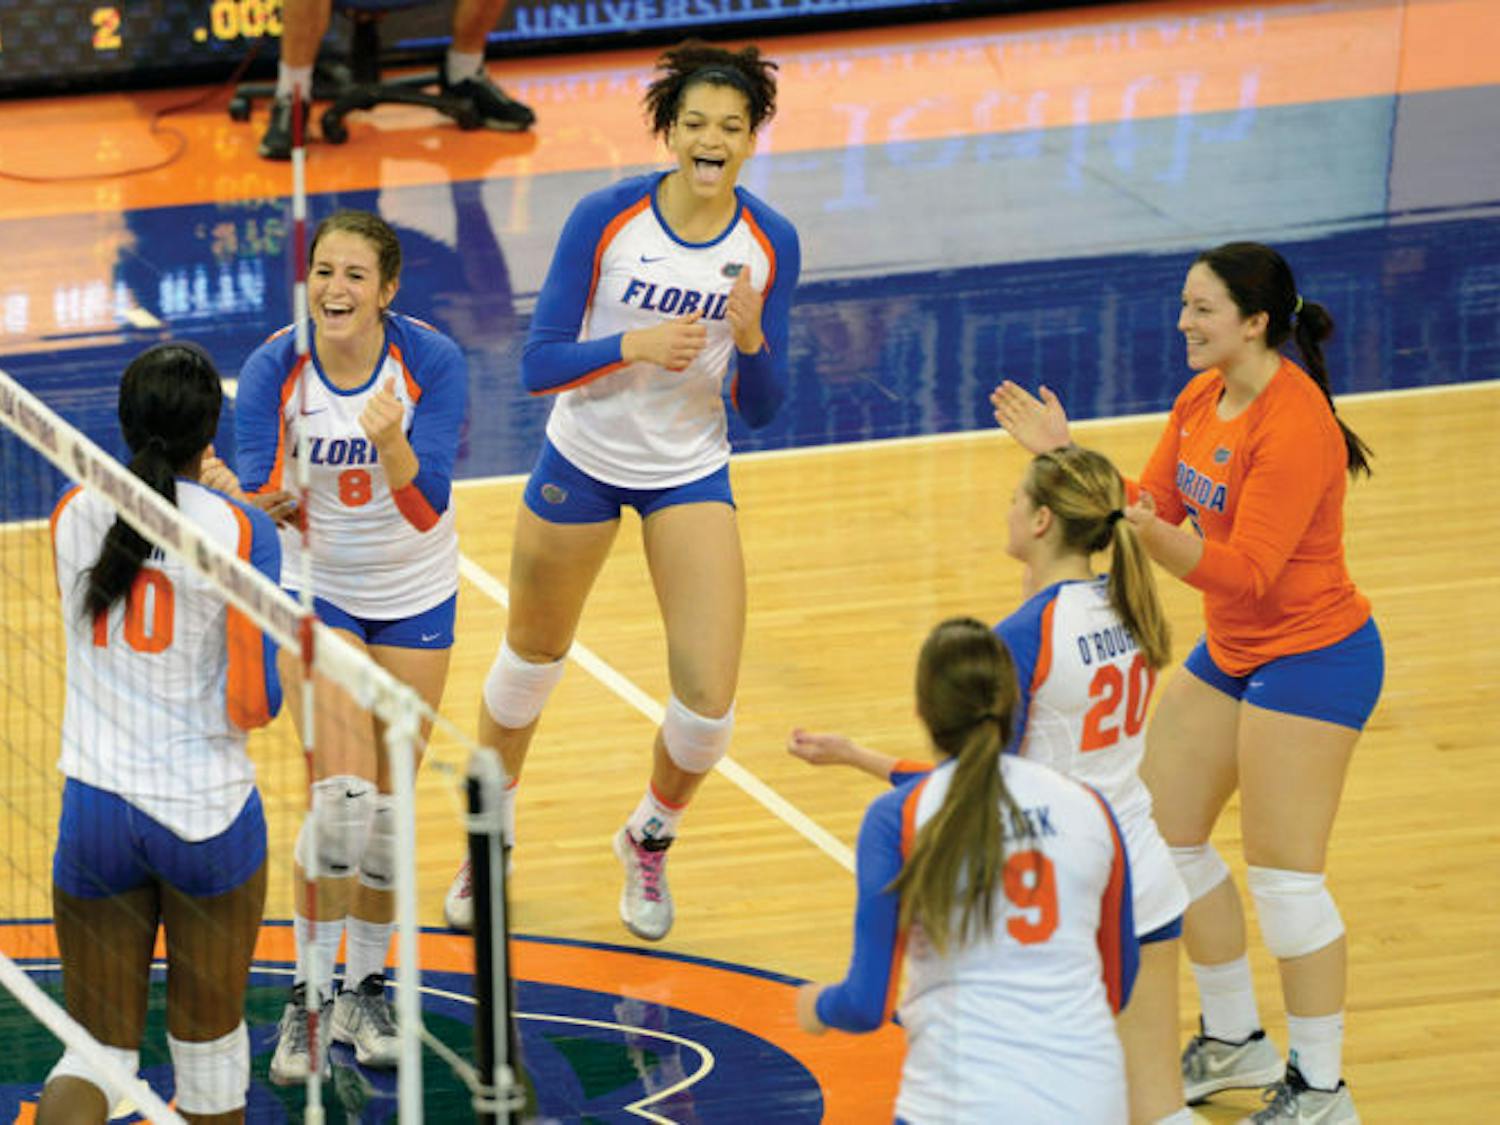 Alex Holston celebrates with teammates during Florida’s three-set win against Tennessee on Oct. 27 in the O’Connell Center. The freshman is third on the Gators in kills per set.